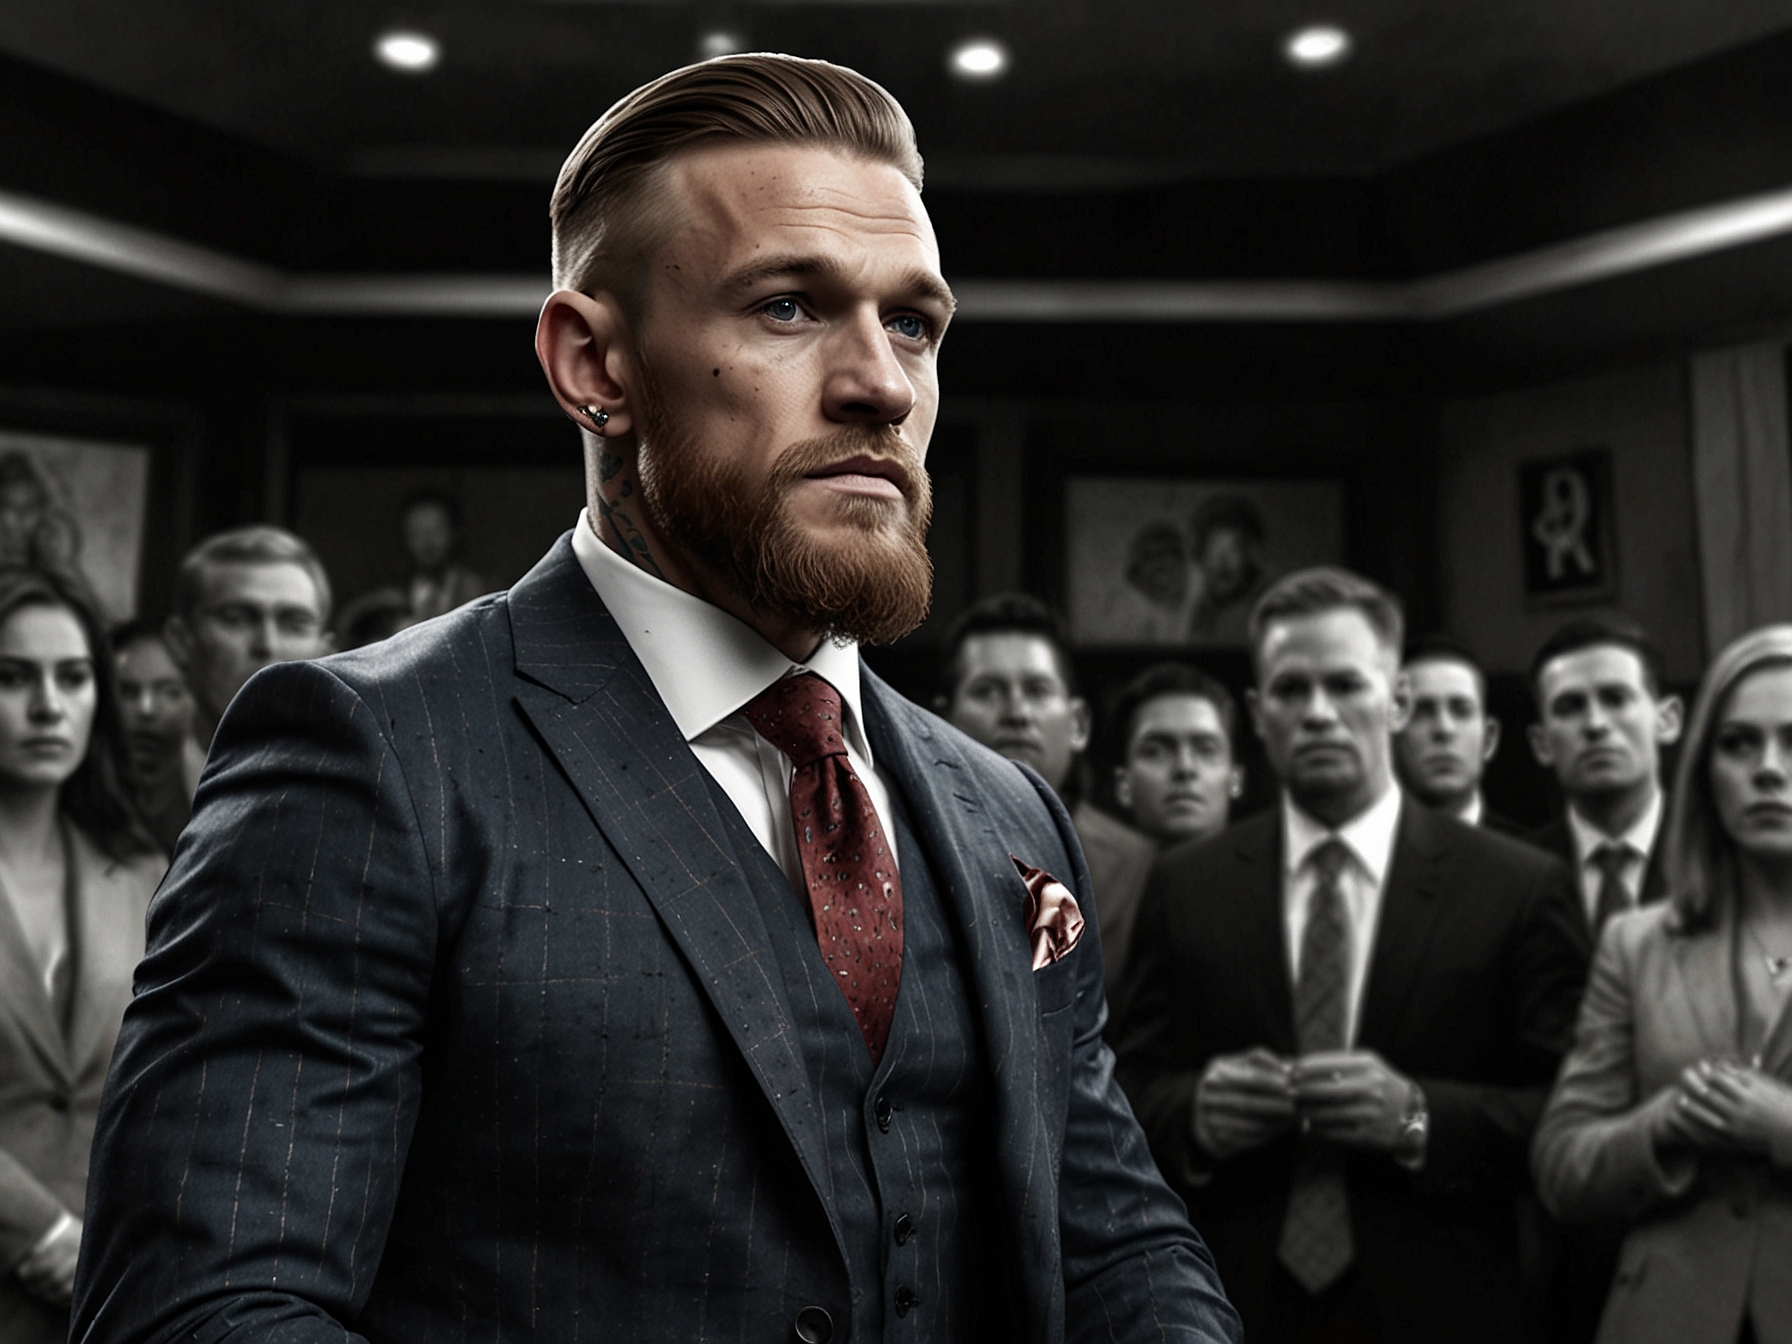 Conor McGregor, dressed in a sharp, tailored suit, confidently addressing the media during his first public appearance since announcing his injury, with a crowd of fans and photographers in the background.